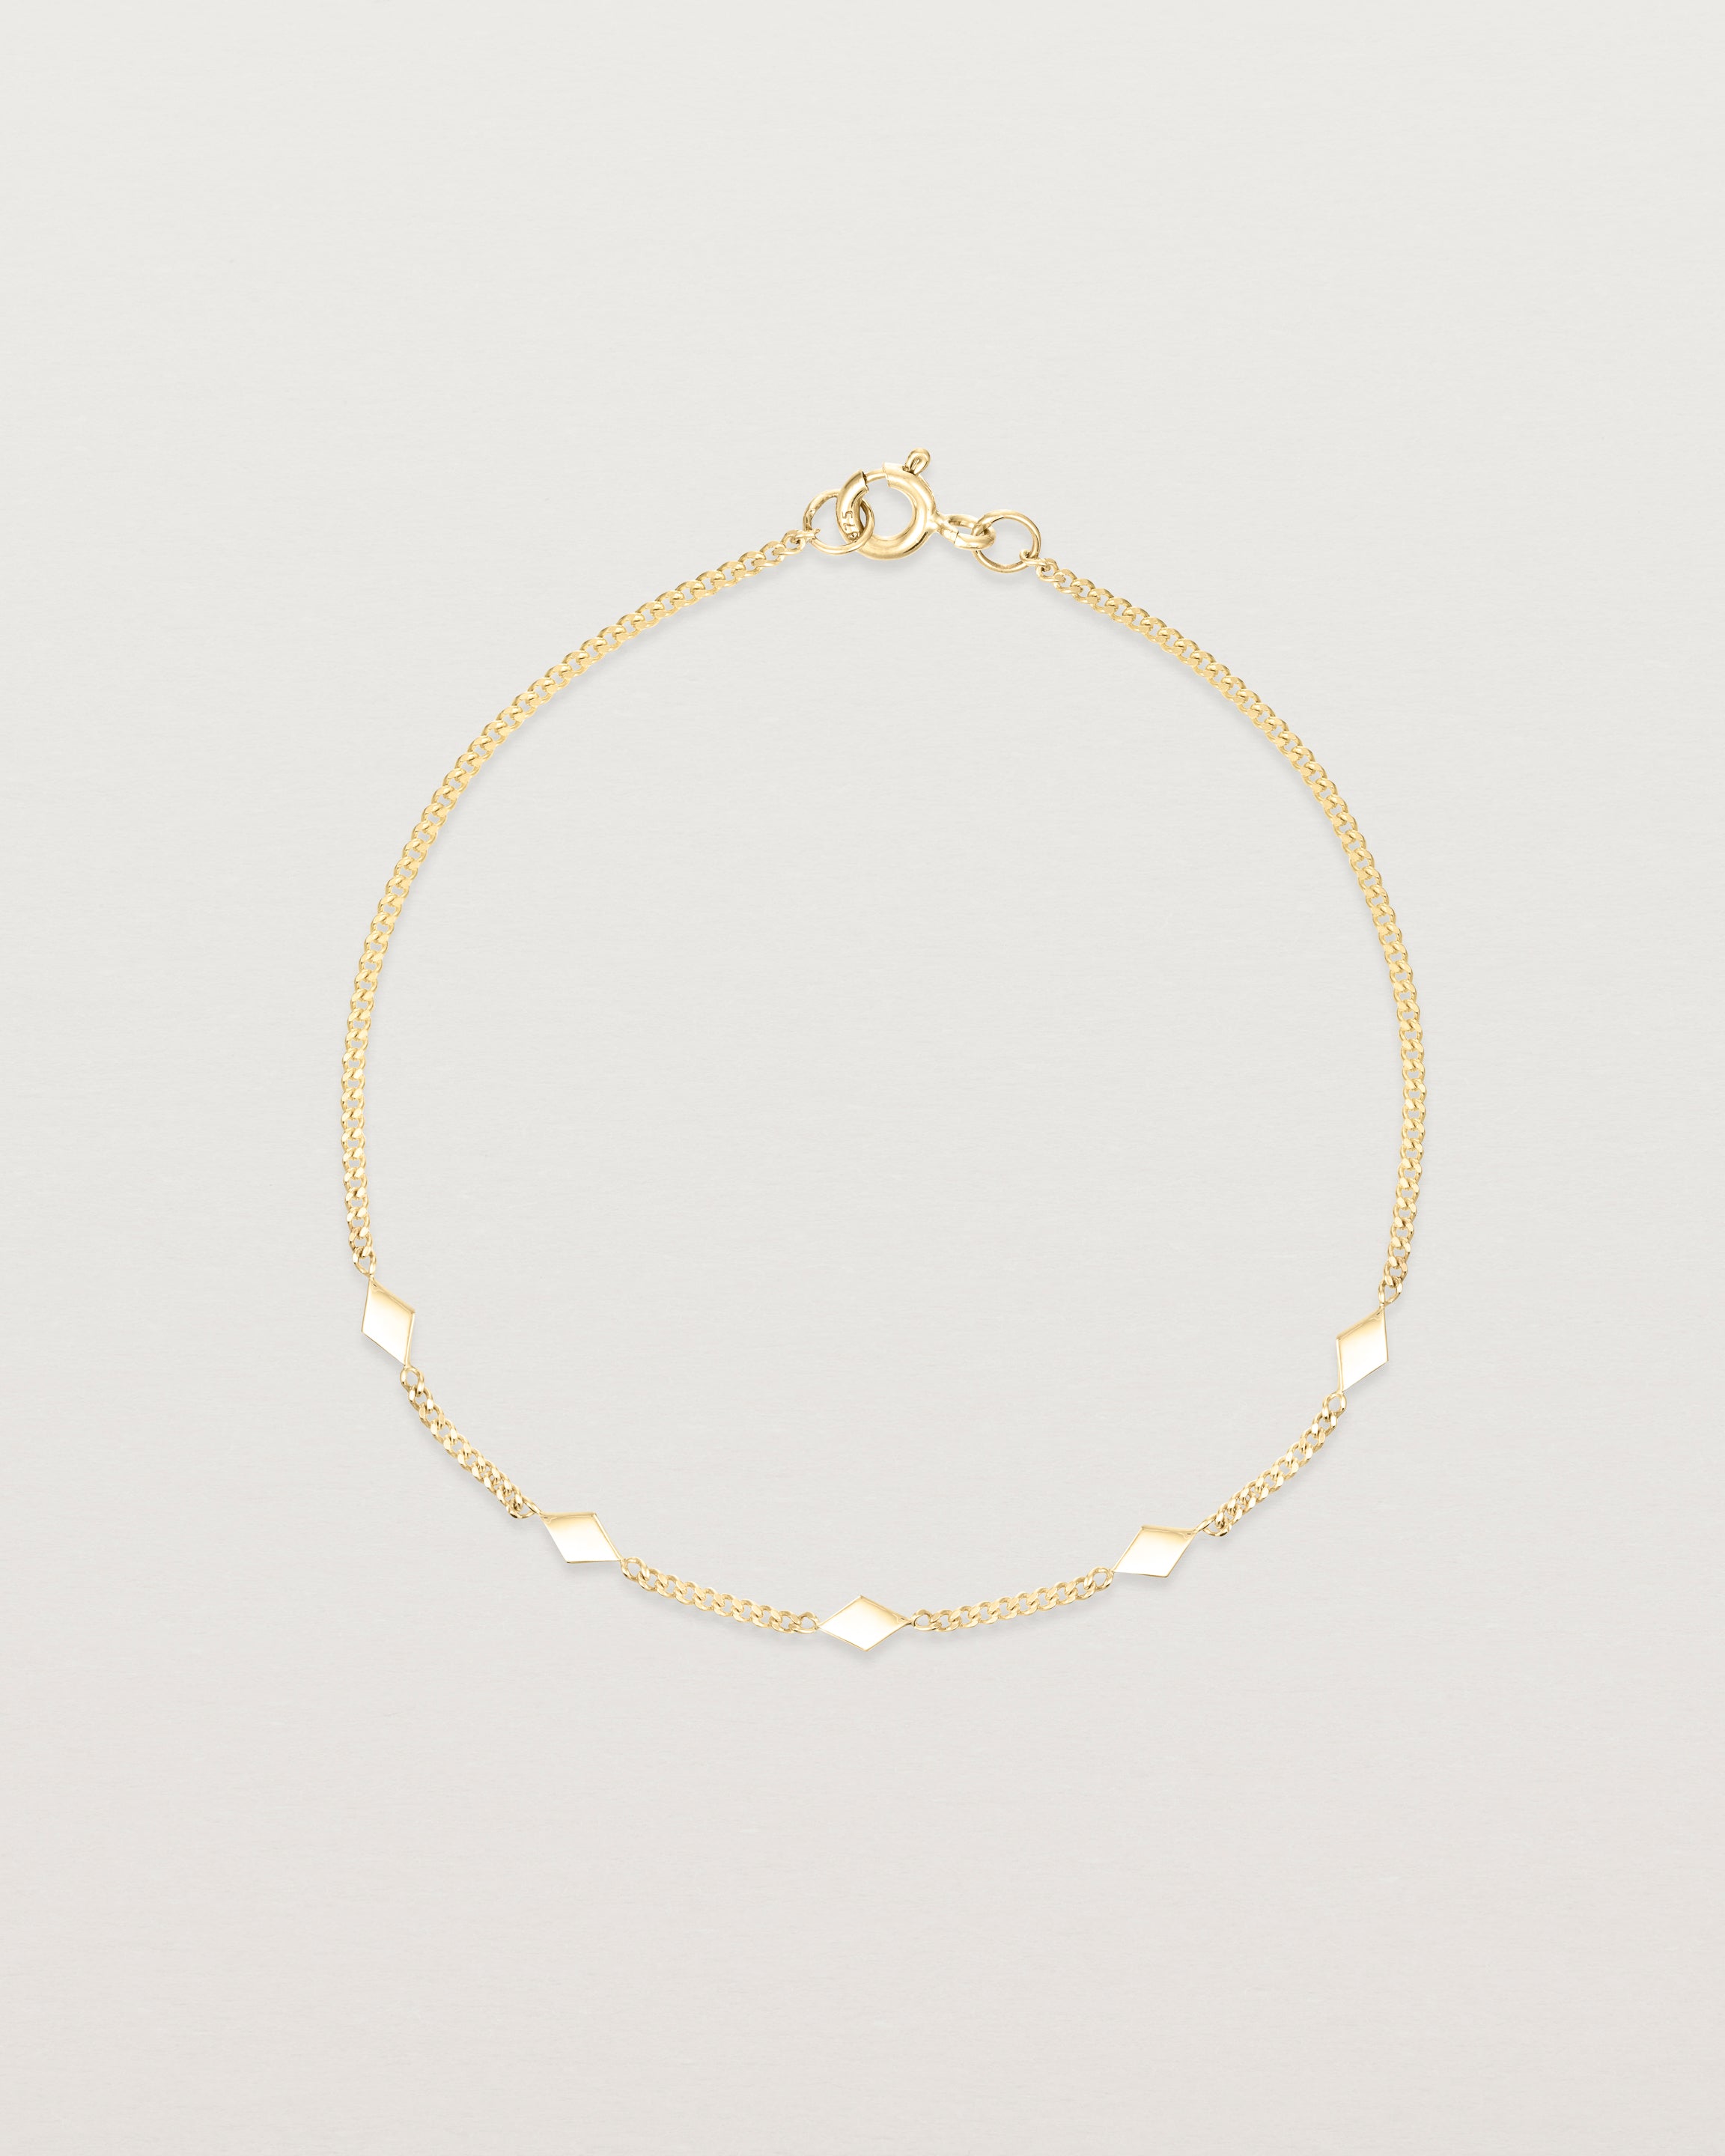 Top down view of the Nuna Charm Bracelet in Yellow Gold.